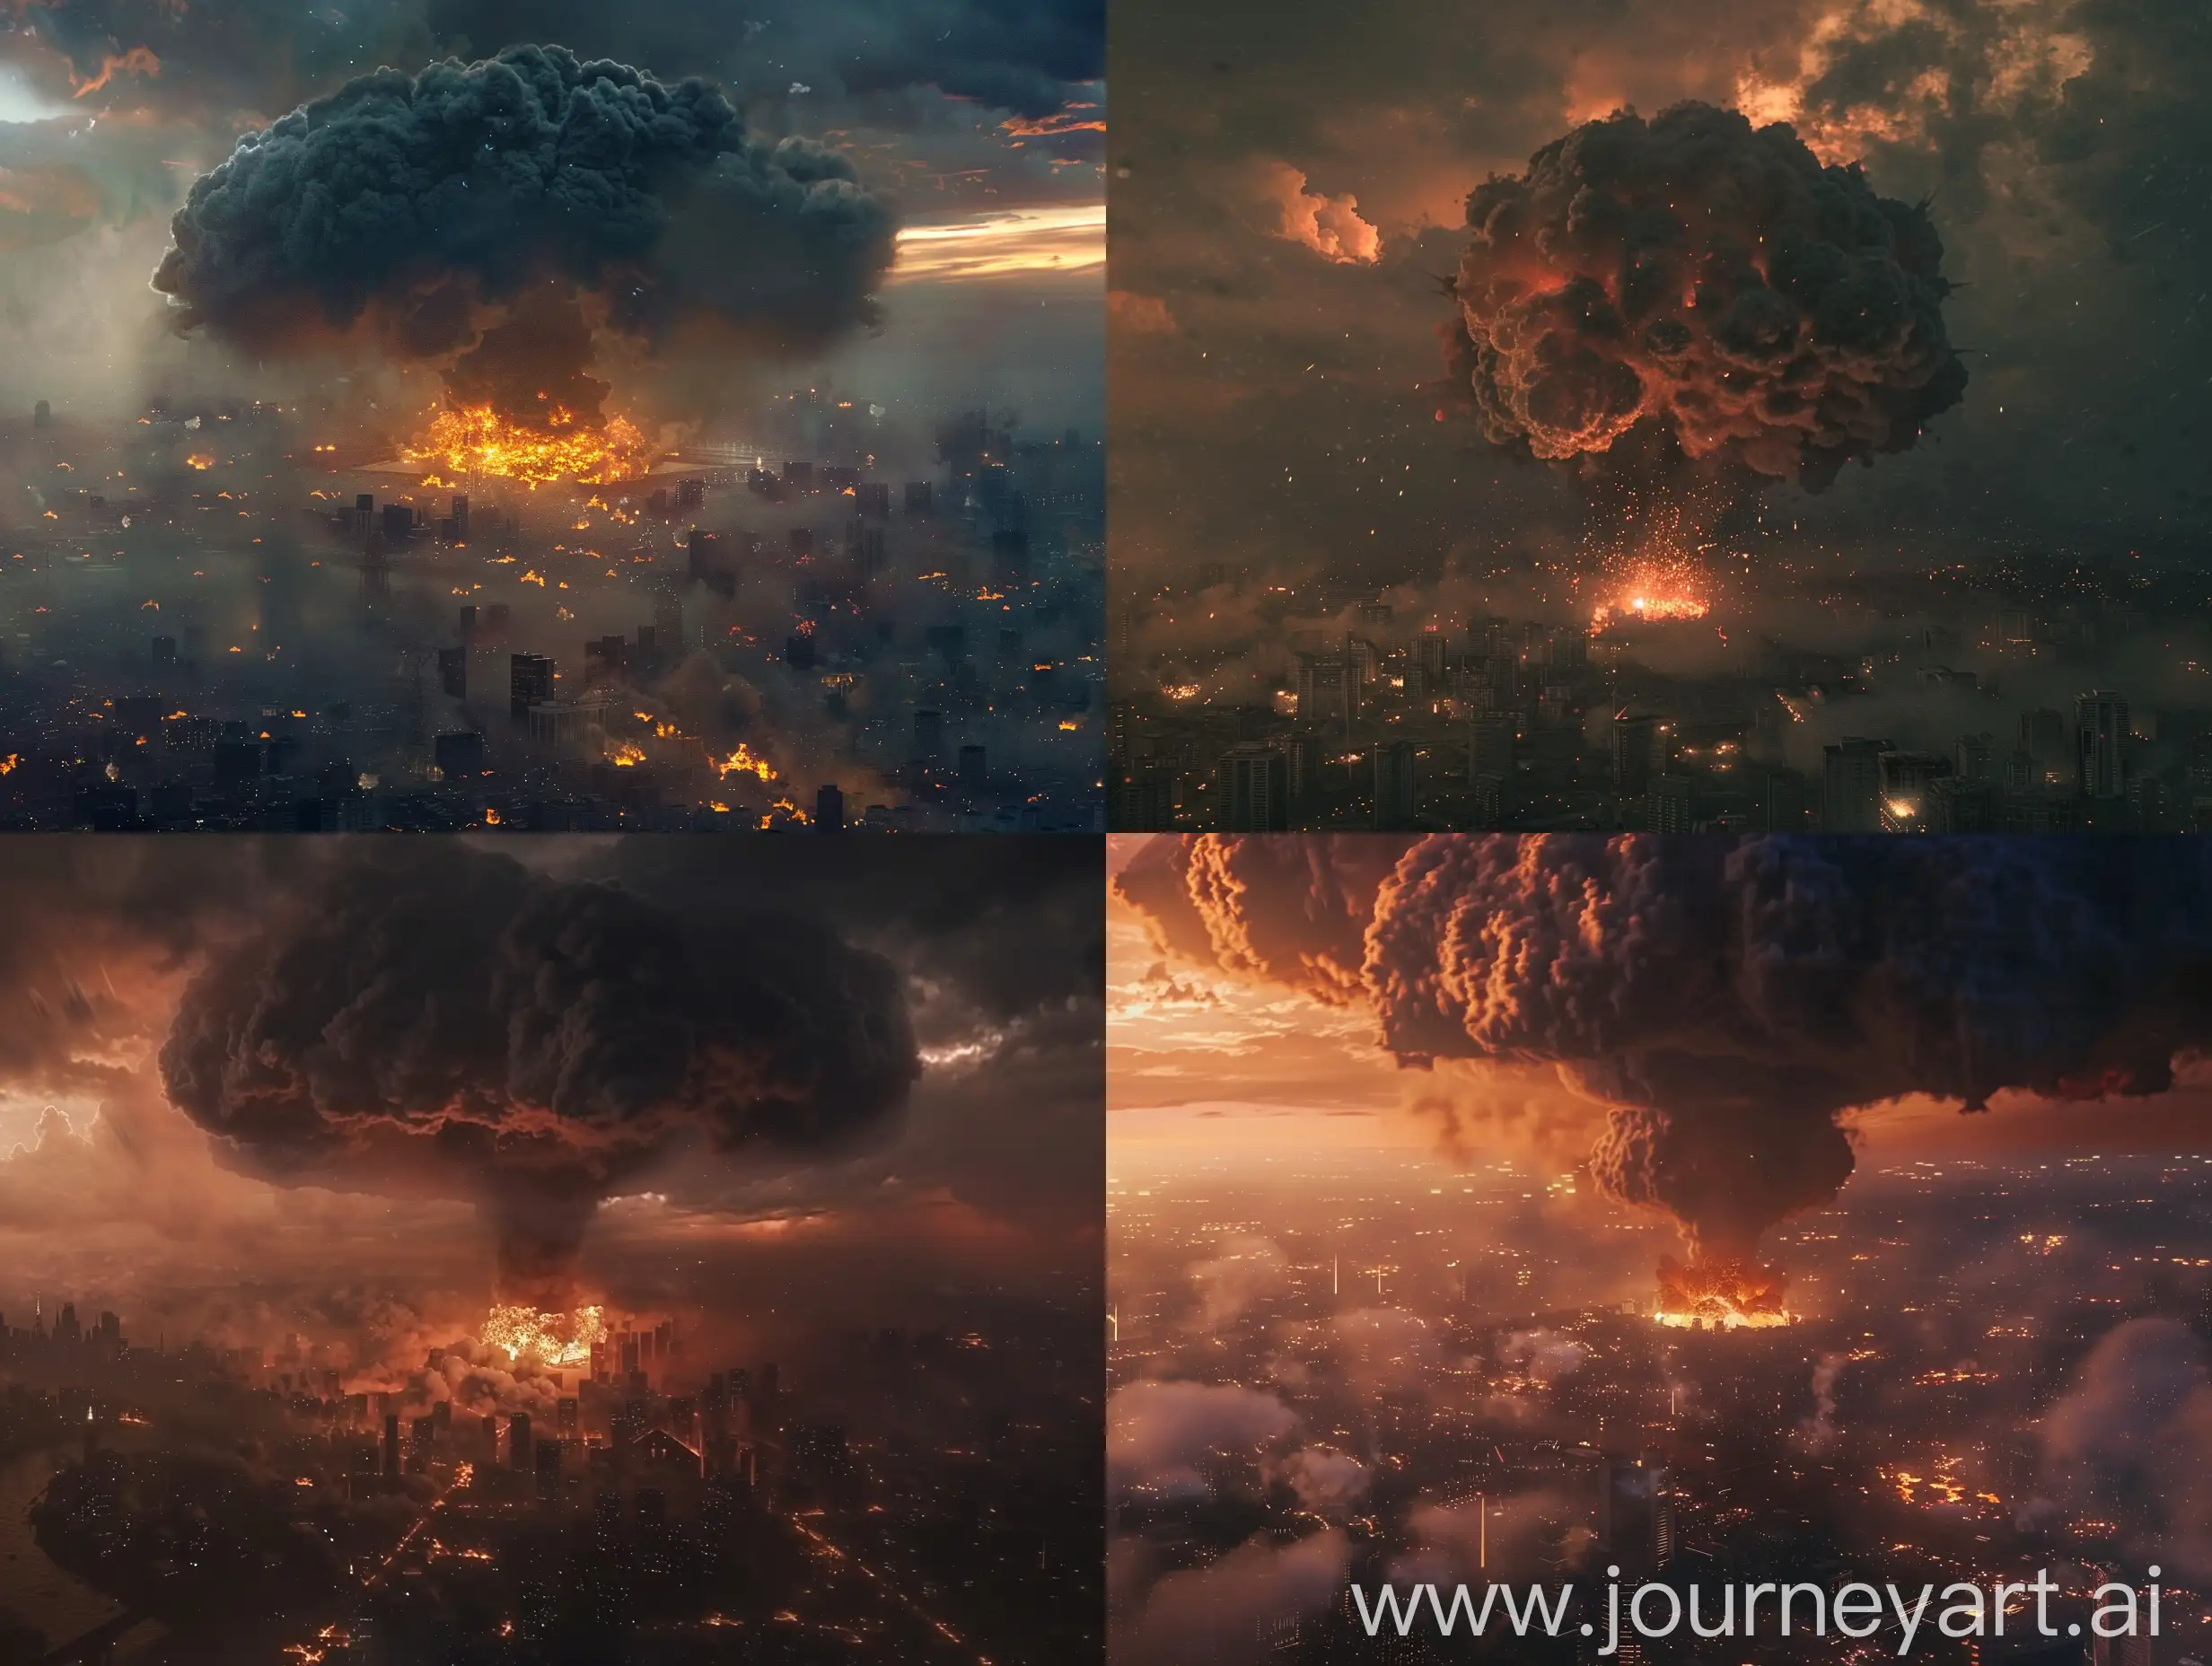 Cinematic-View-of-City-Engulfed-in-Nuclear-Cloud-Spectacular-8K-Scene-with-Dark-Themes